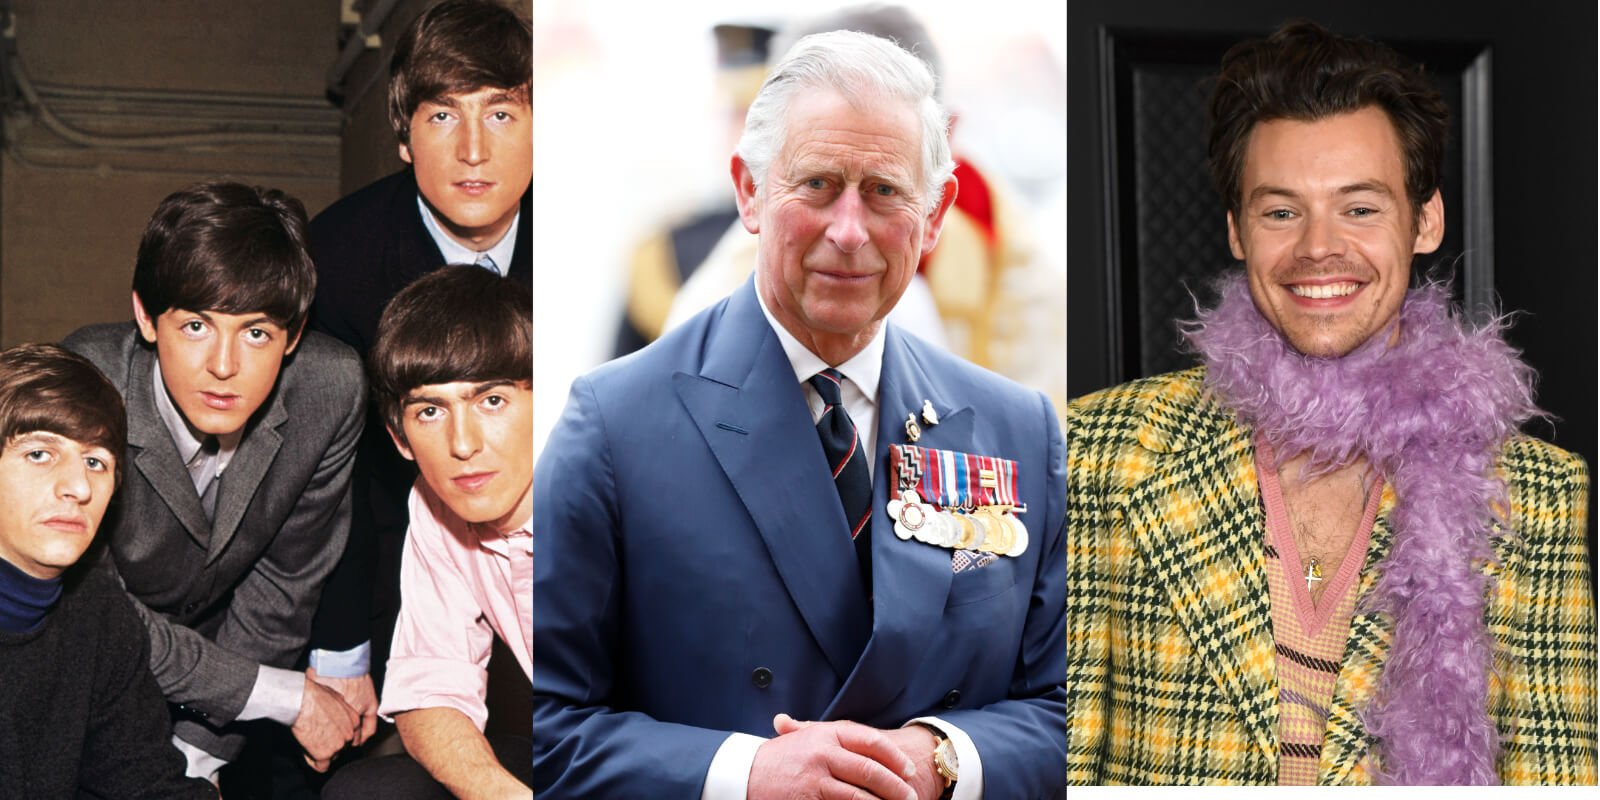 The Beatles, King Charles and Harry Styles have united for the 2023 coronation playlist of music.